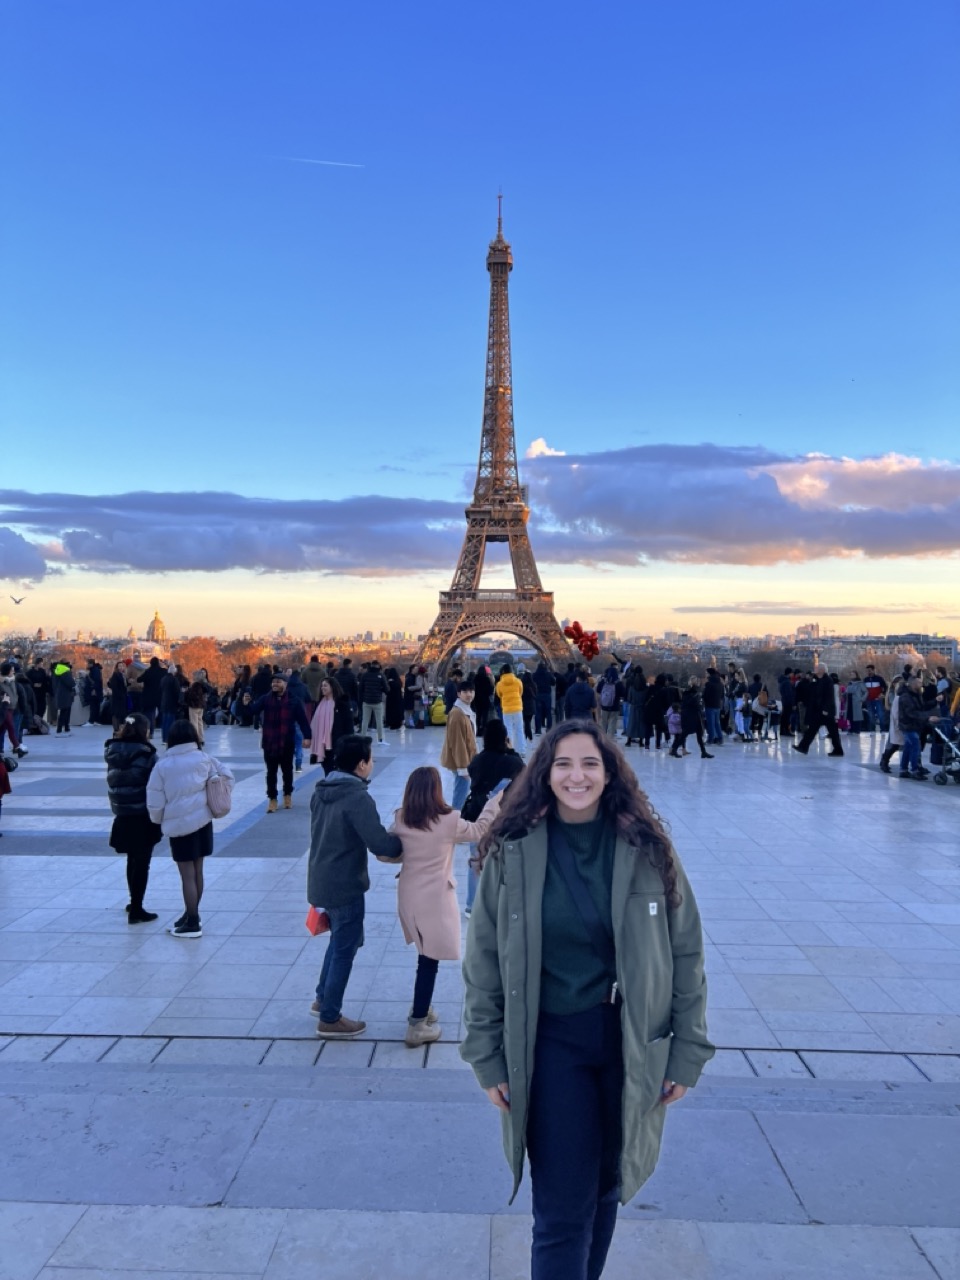 Young woman standing in a plaza with the Eiffel Tower in the distance